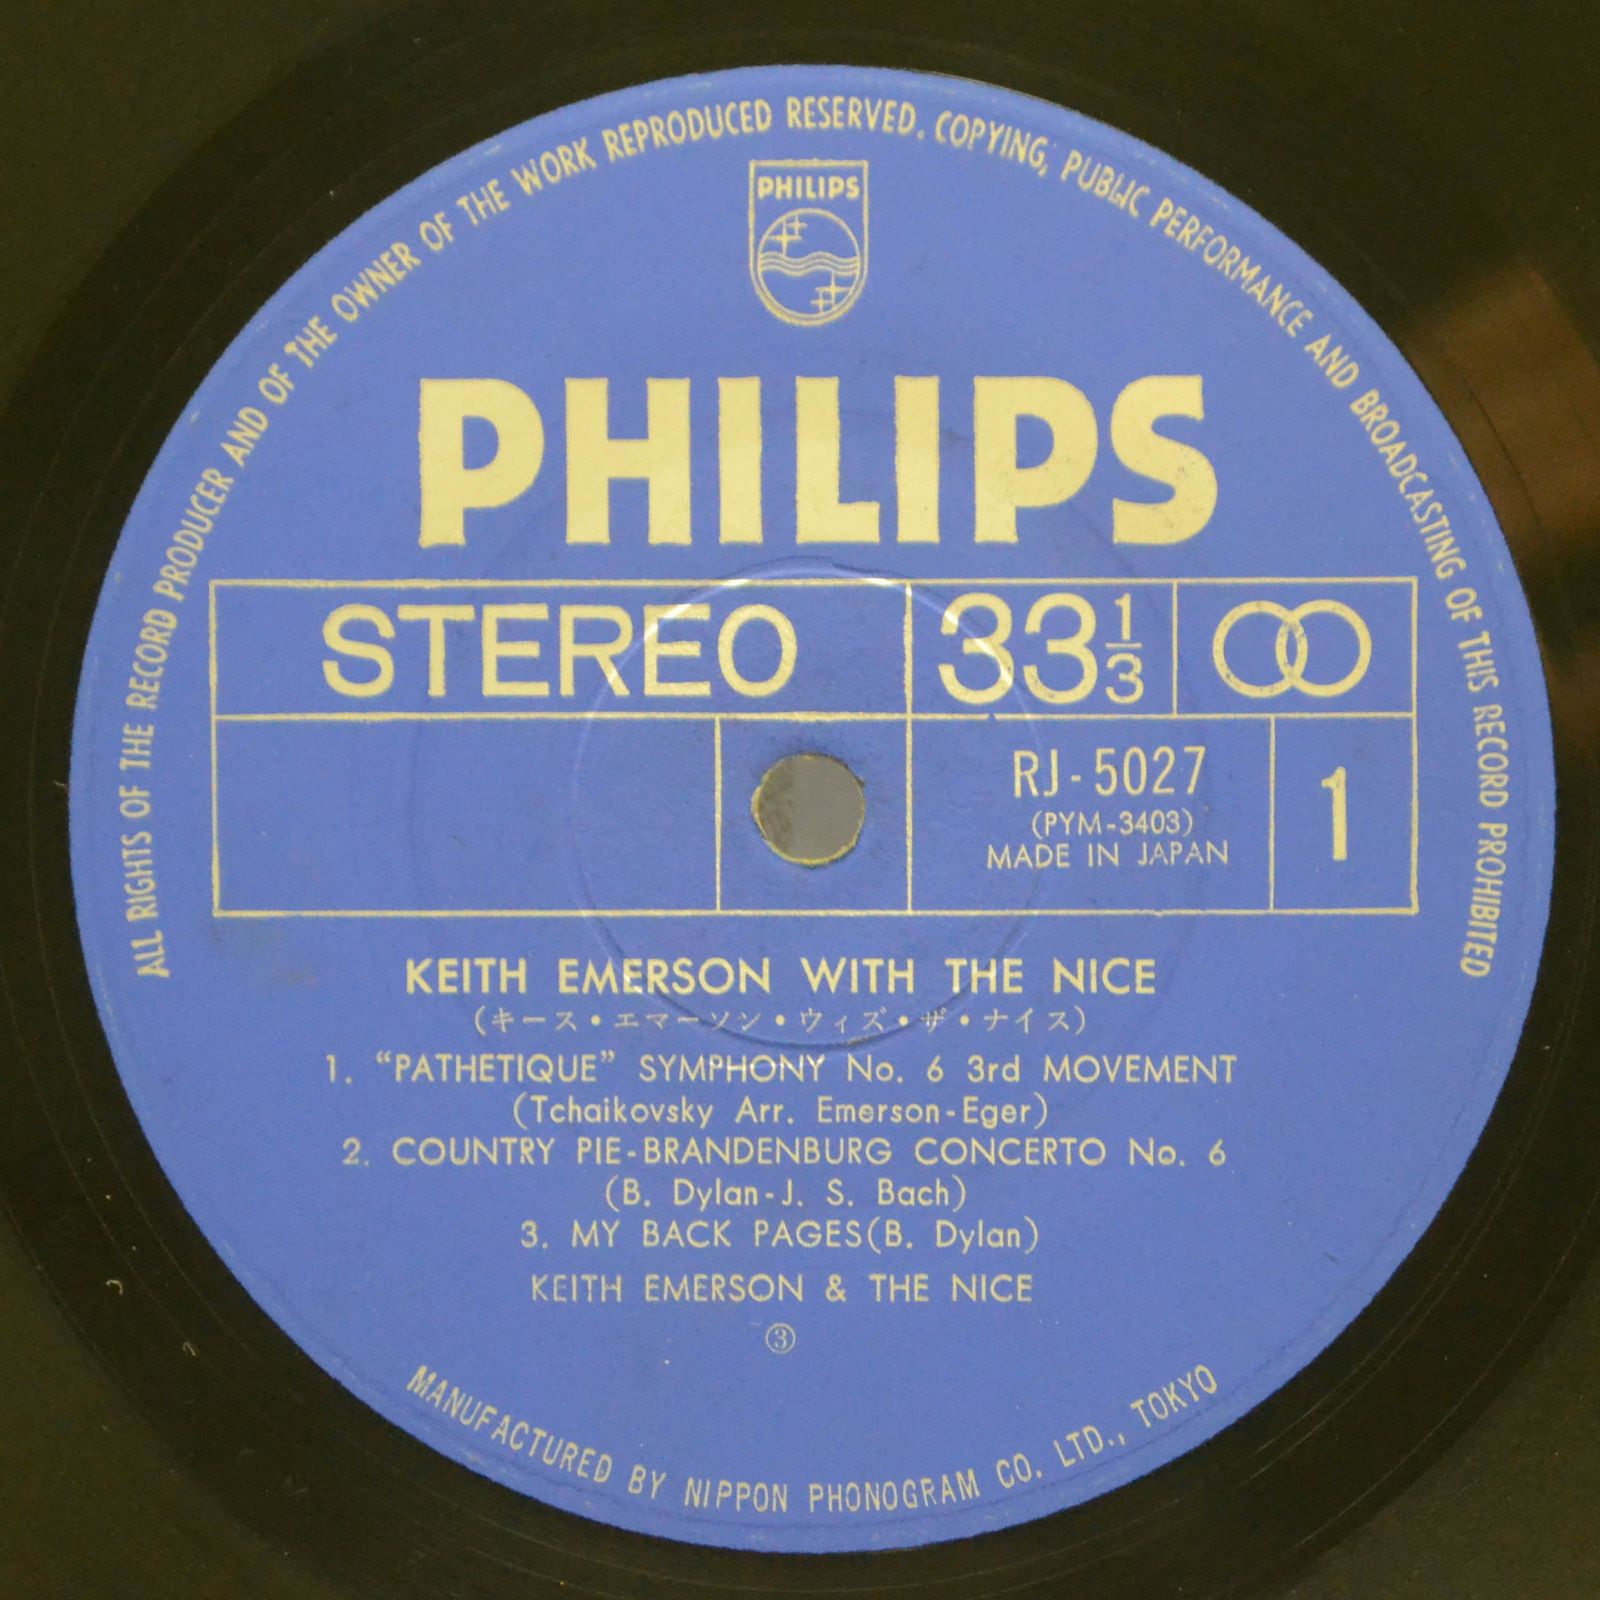 Keith Emerson With The Nice — Keith Emerson With The Nice, 1972